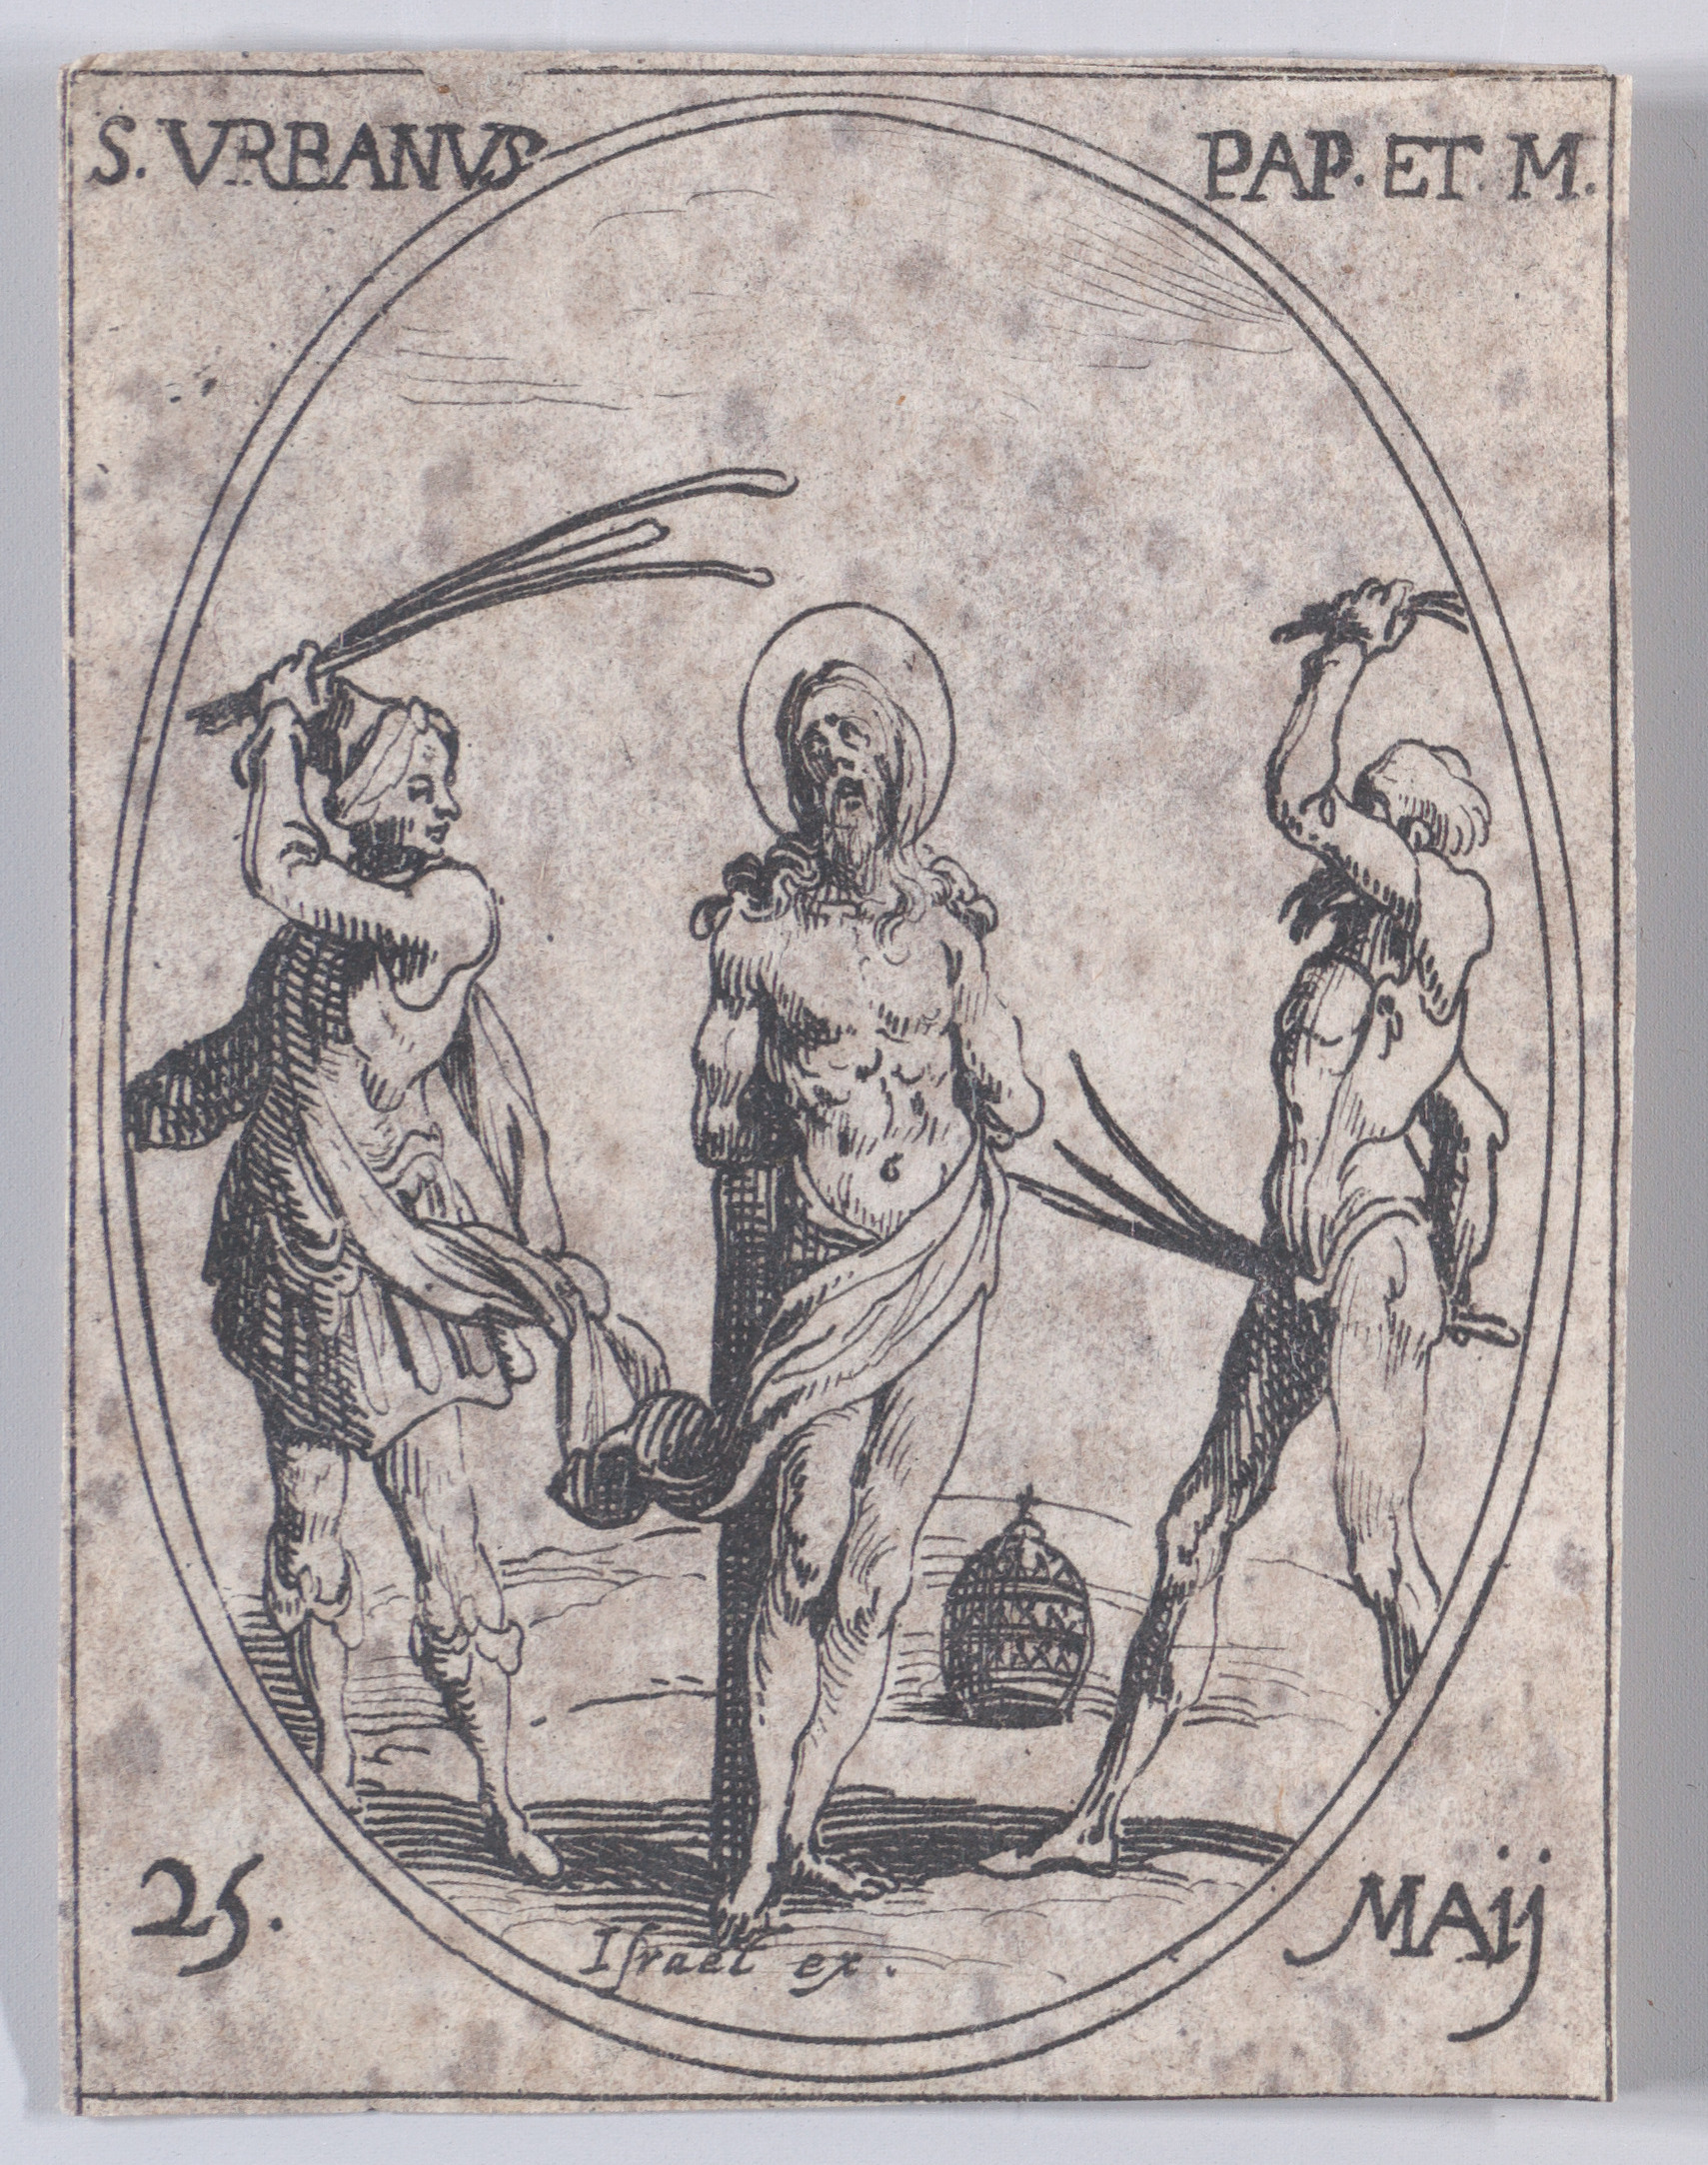 S. Urbain, pape et martyr (St. Urban, Pope and Martyr), May 25th, from Les Images De Tous Les Saincts et Saintes de L'Année (Images of All of the Saints and Religious Events of the Year), Jacques Callot (French, Nancy 1592–1635 Nancy), Etching; second state of two (Lieure)